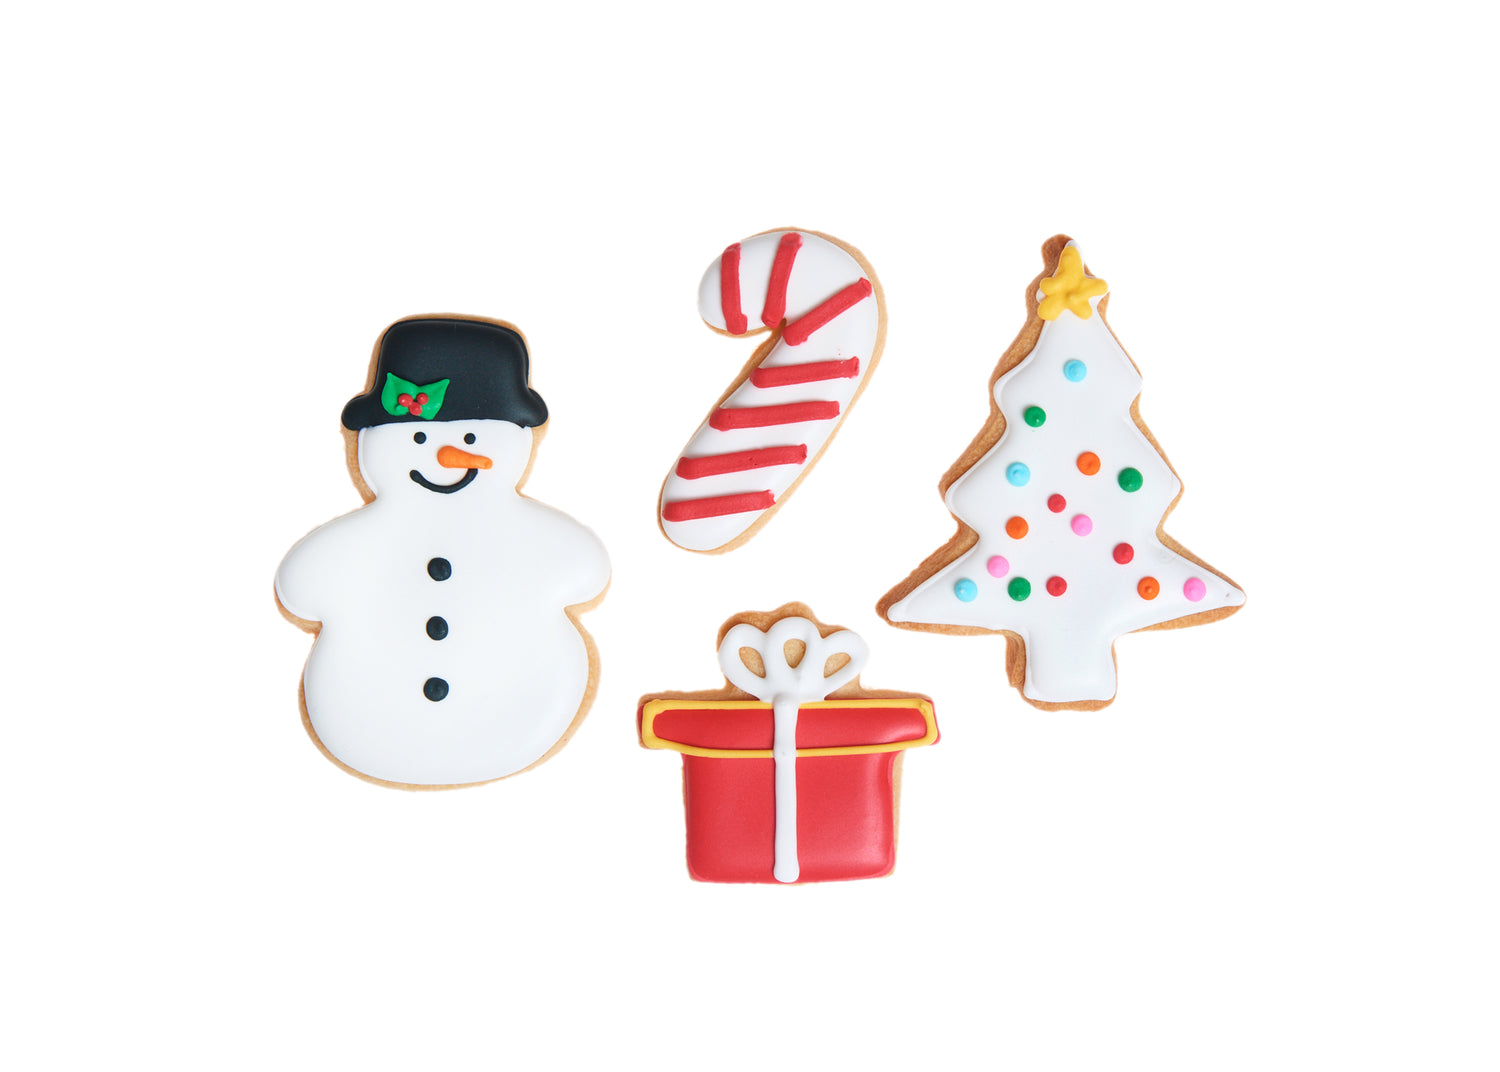 Jolly Holiday Cookie Gift Set